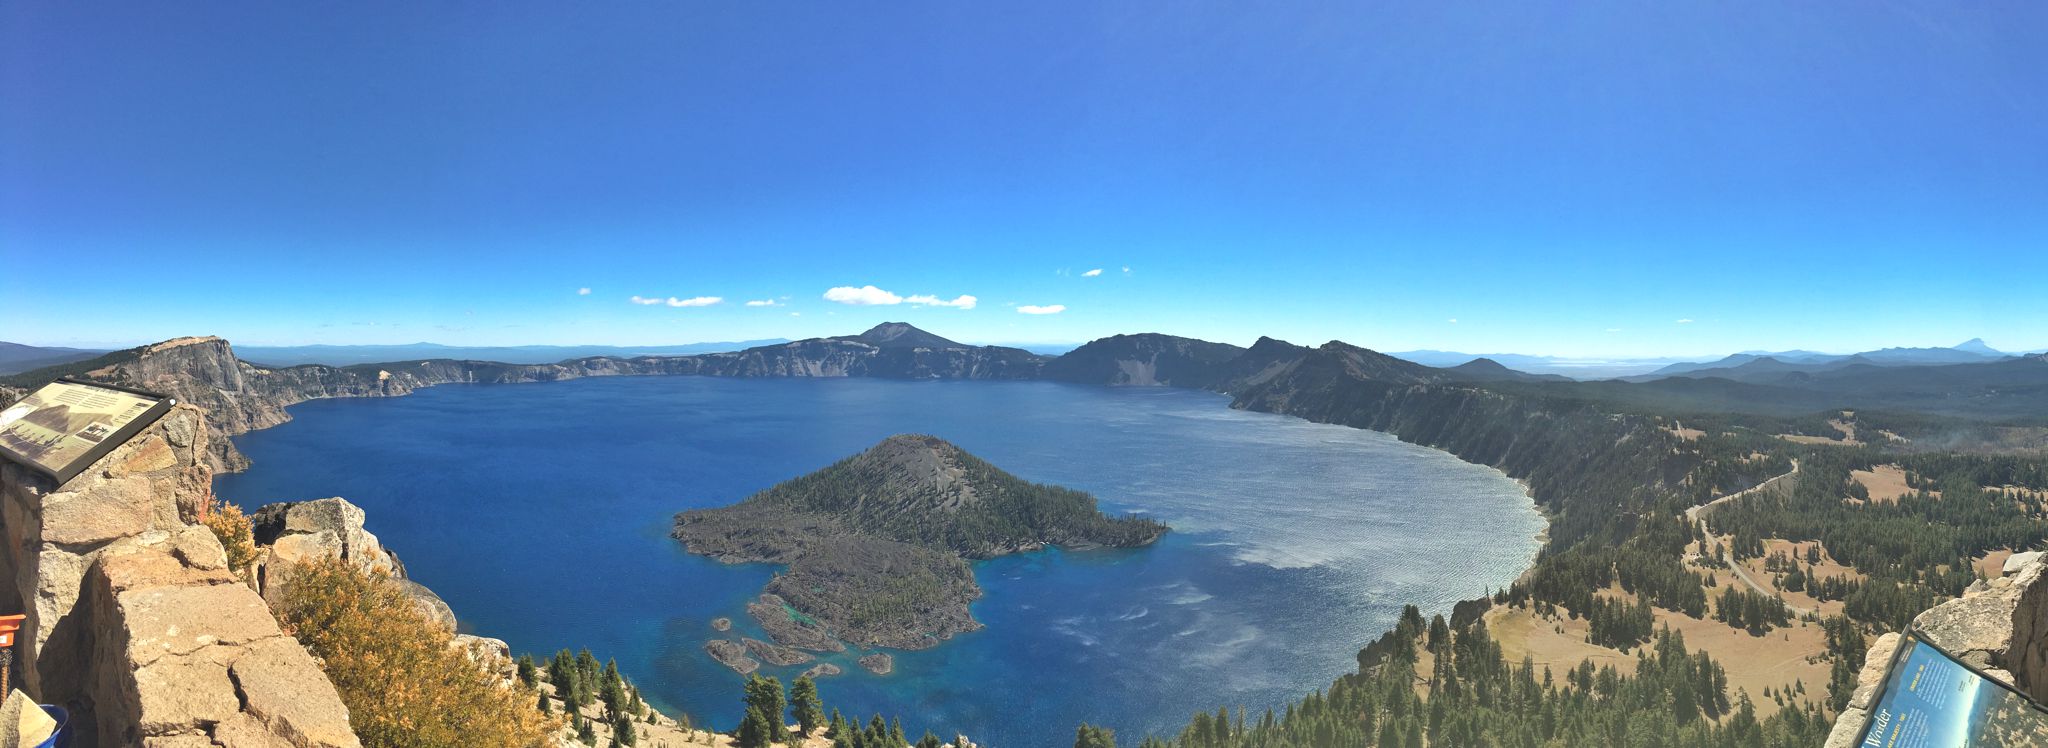 Overlook of Crater Lake with blue skies above.